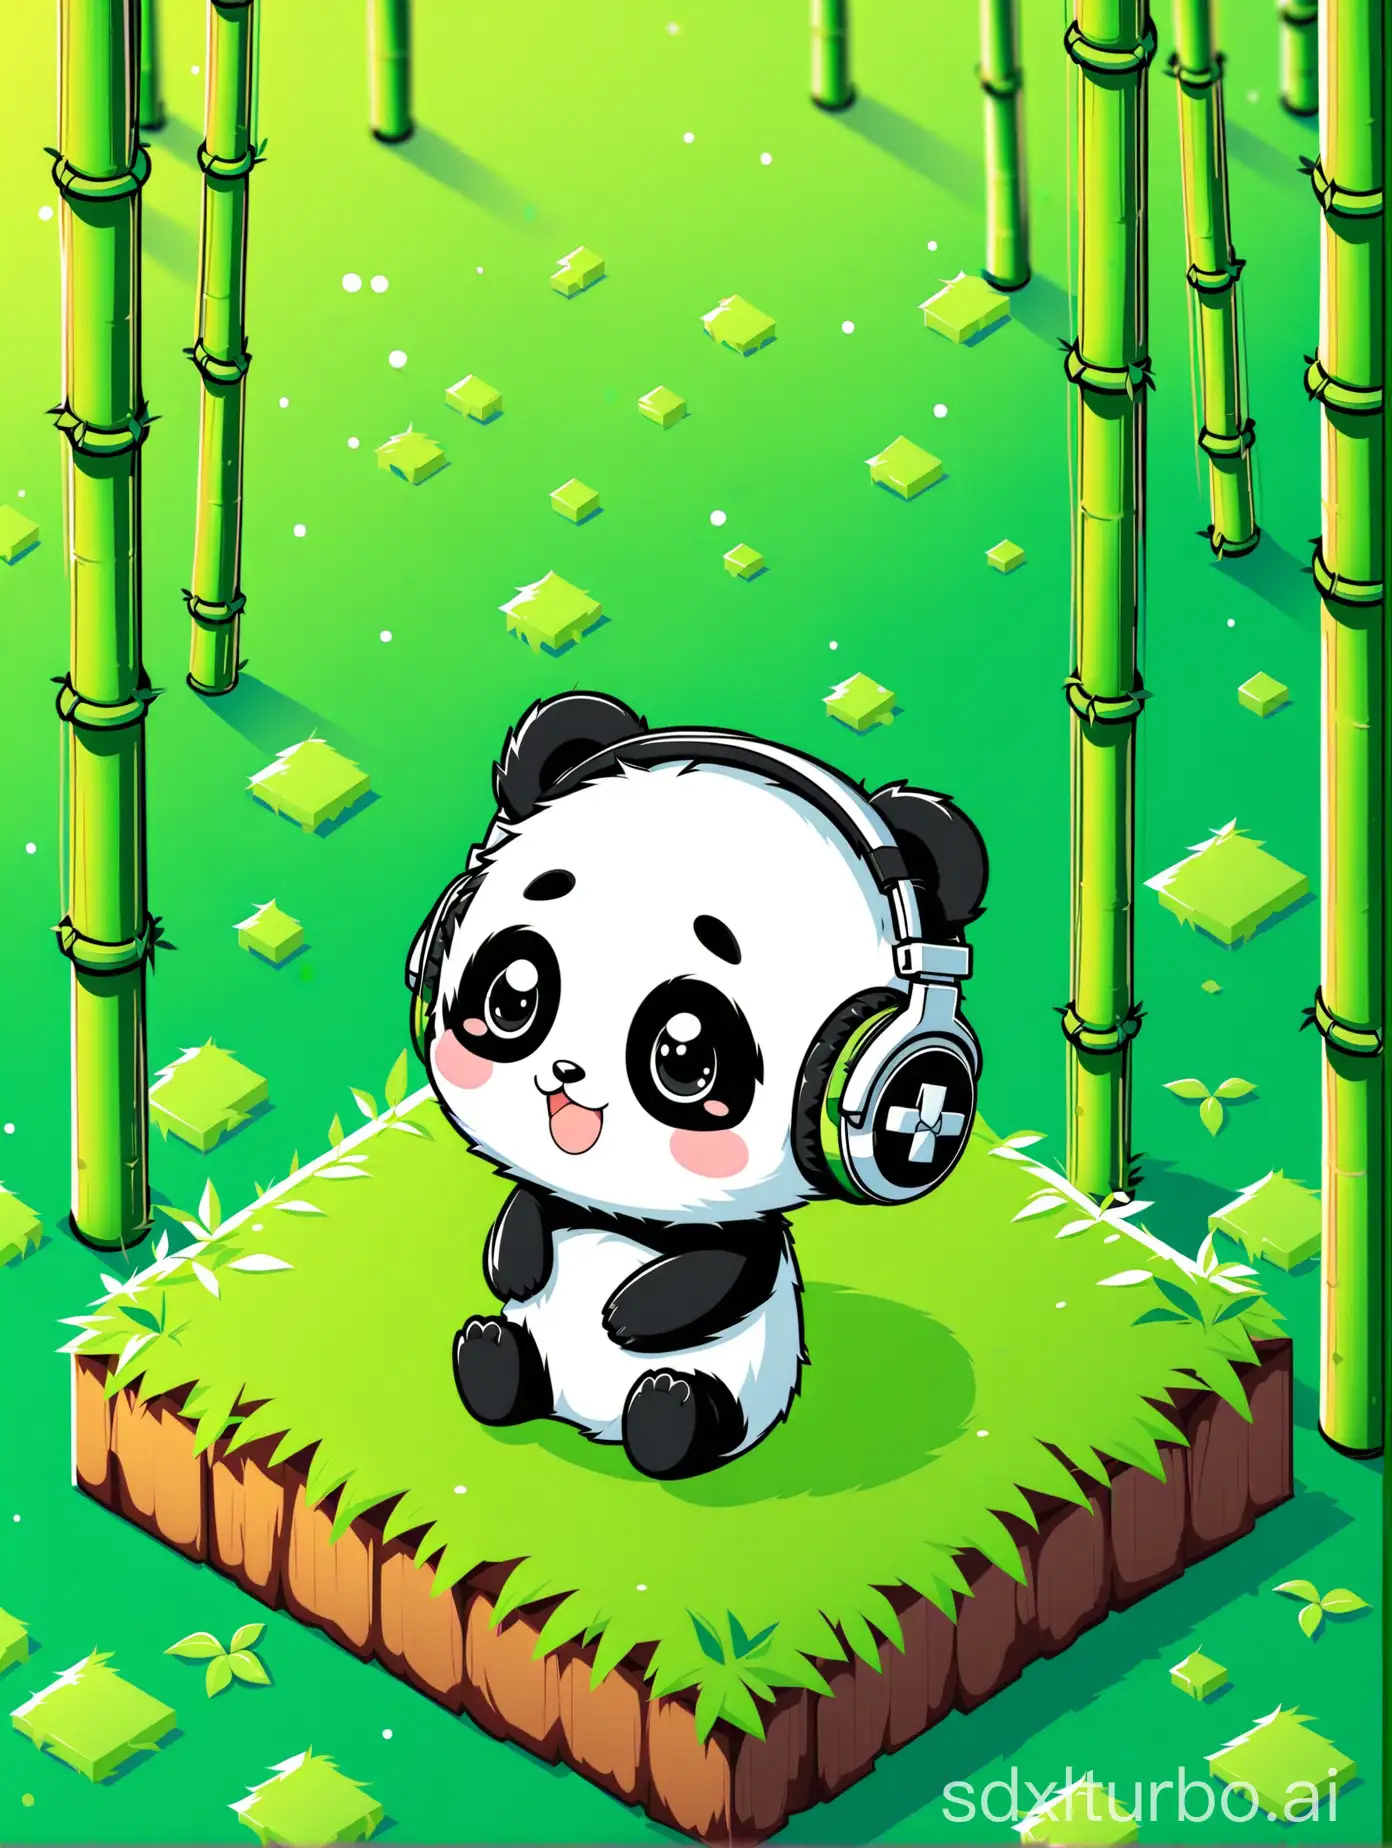 Isometric perspective, elf picture, cute, a panda, the panda wearing headphones, cute expression, bamboo forest background.